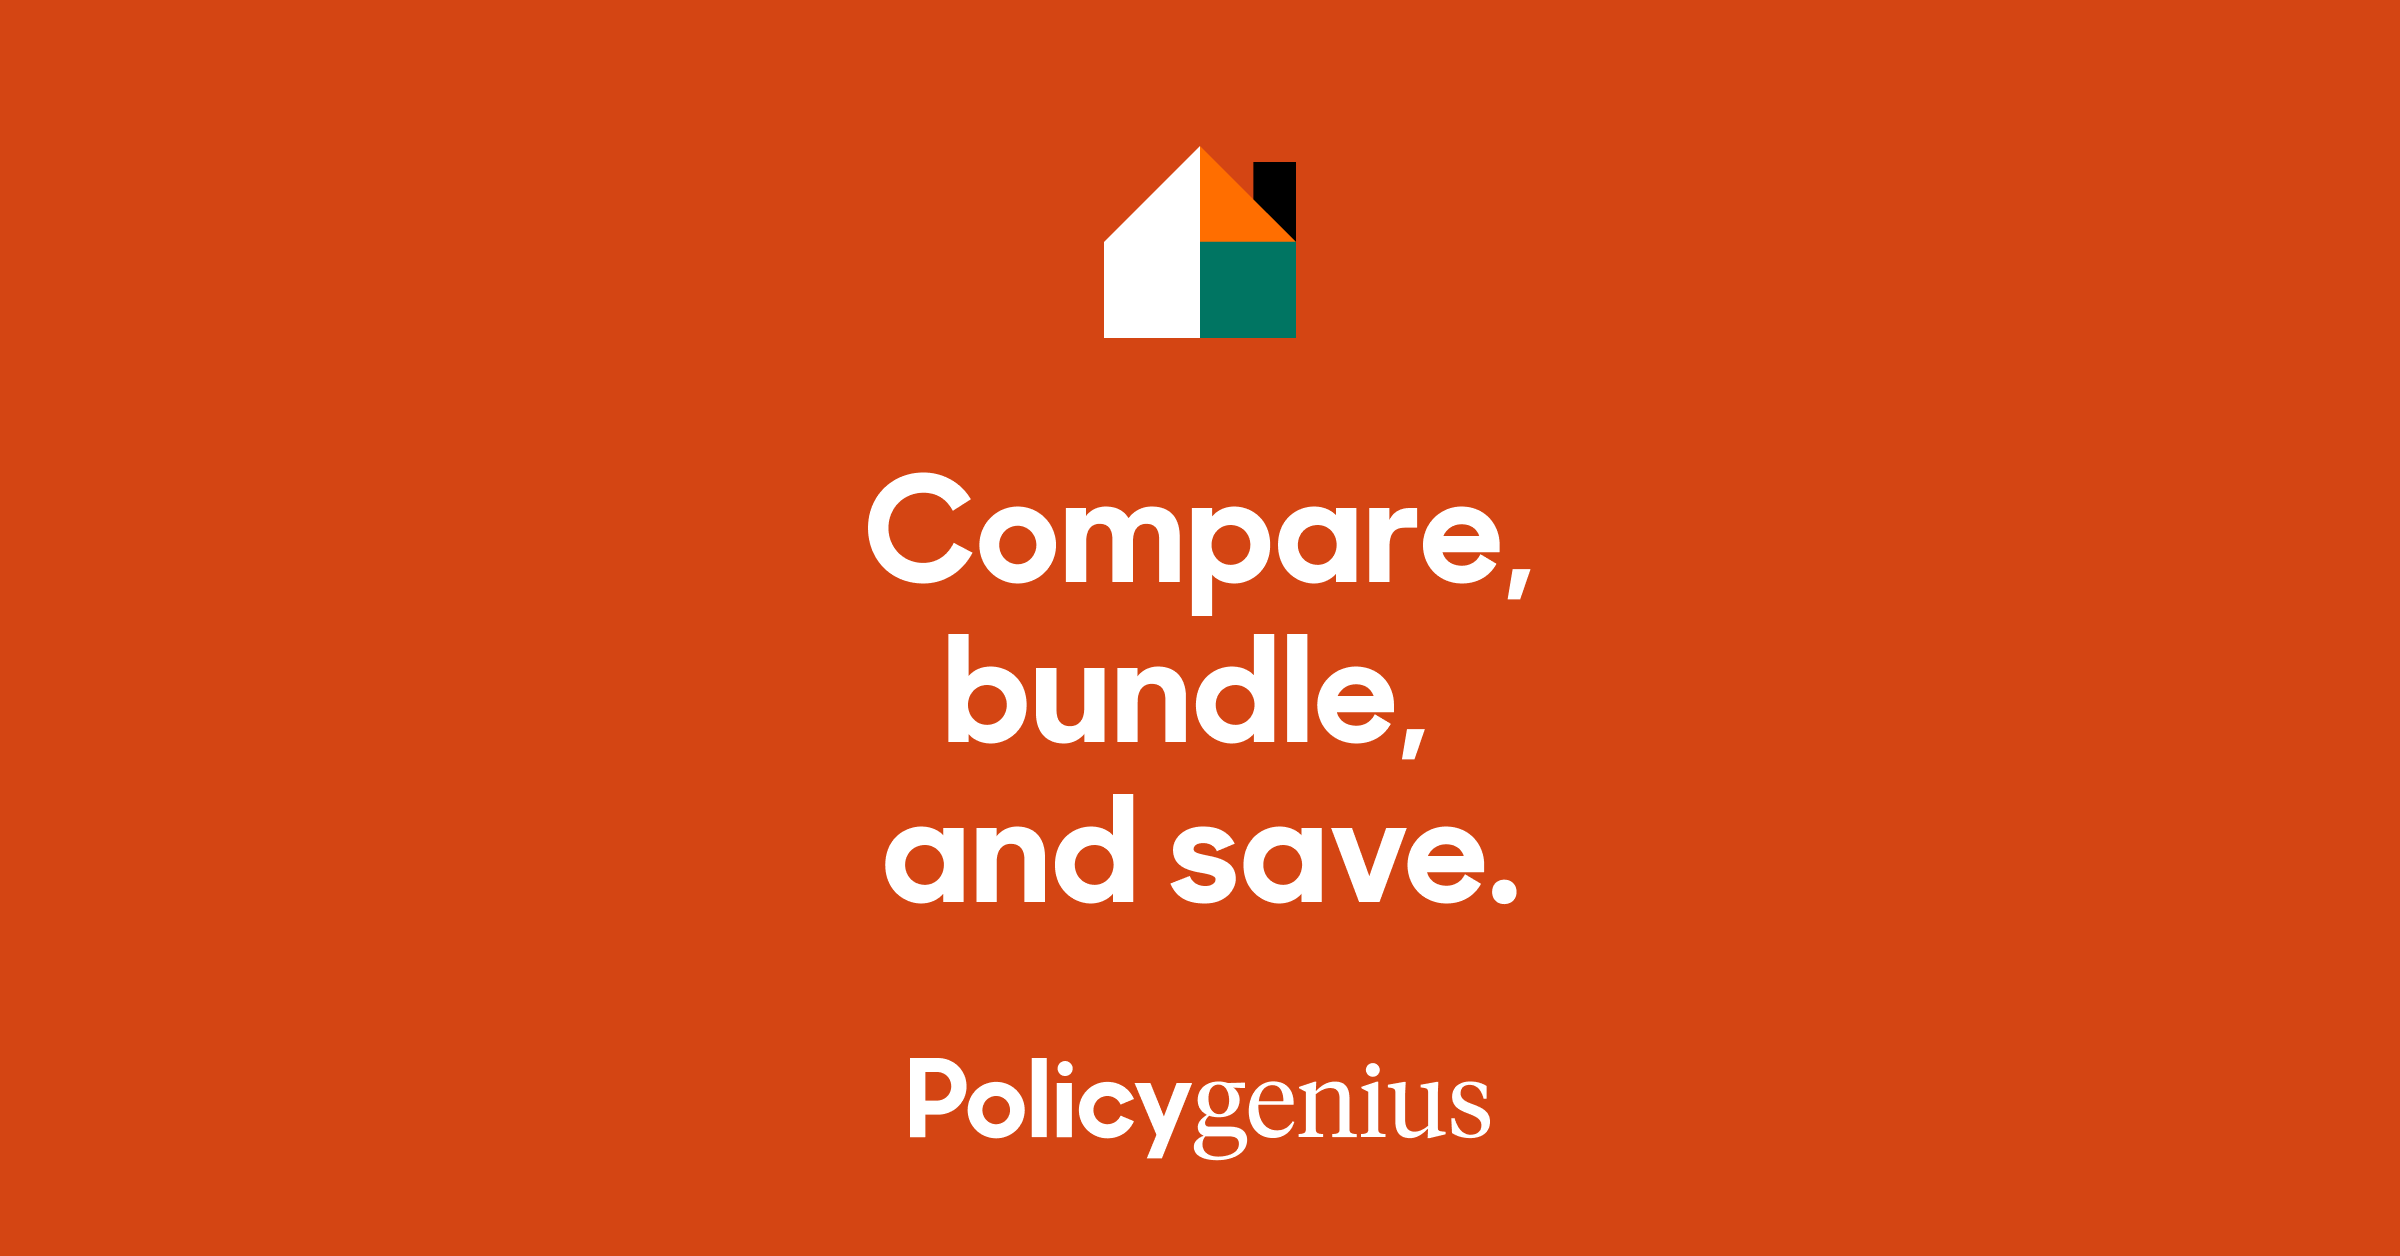 Does Homeowners Insurance Cover Fences? - Policygenius